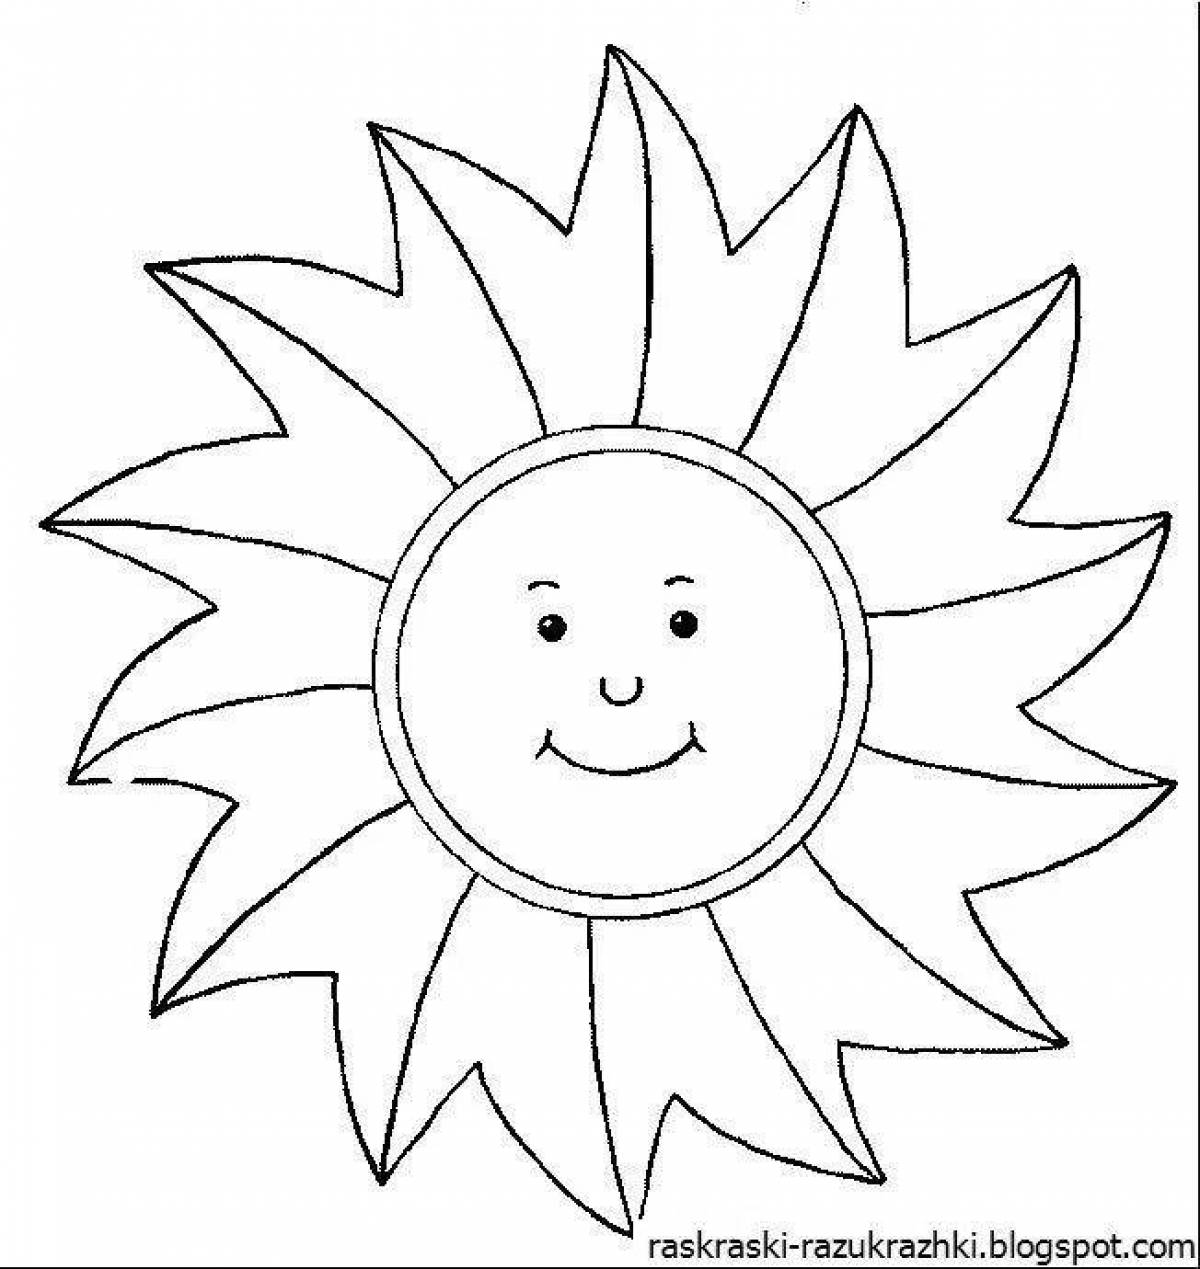 Cute sun coloring book for 3-4 year olds